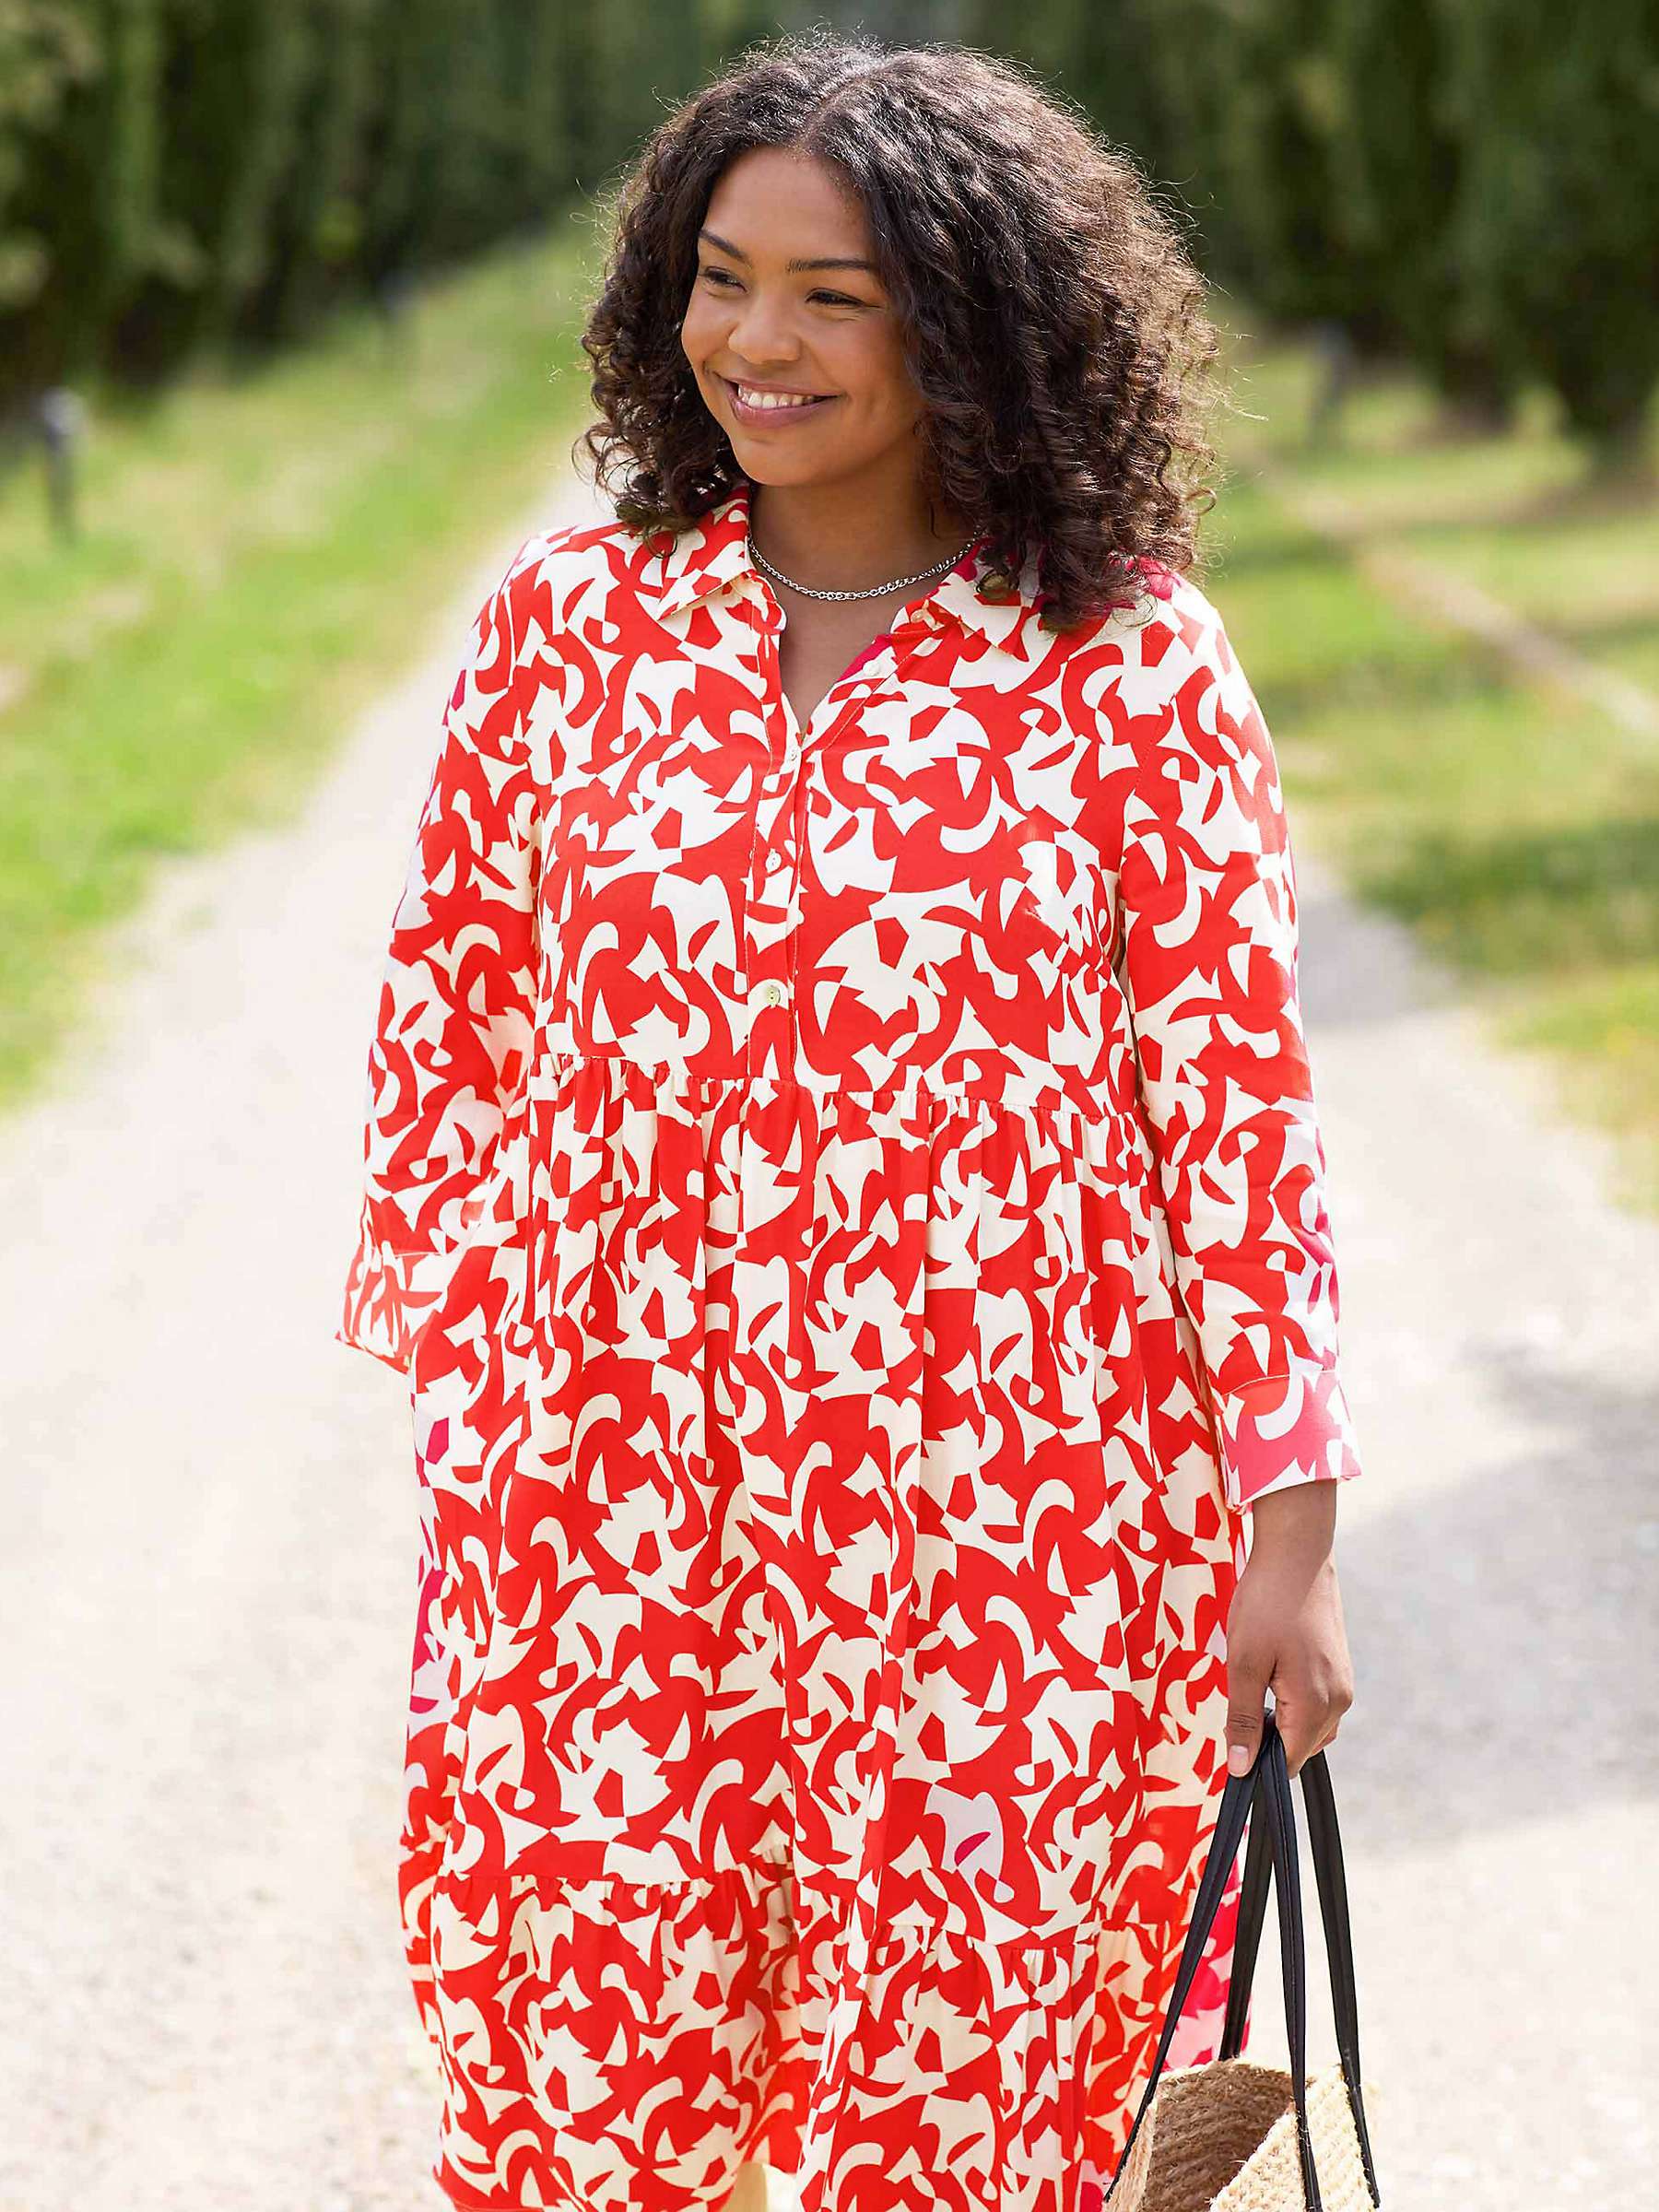 Buy Live Unlimited Curve Tiered Midi Shirt Dress, Red Online at johnlewis.com